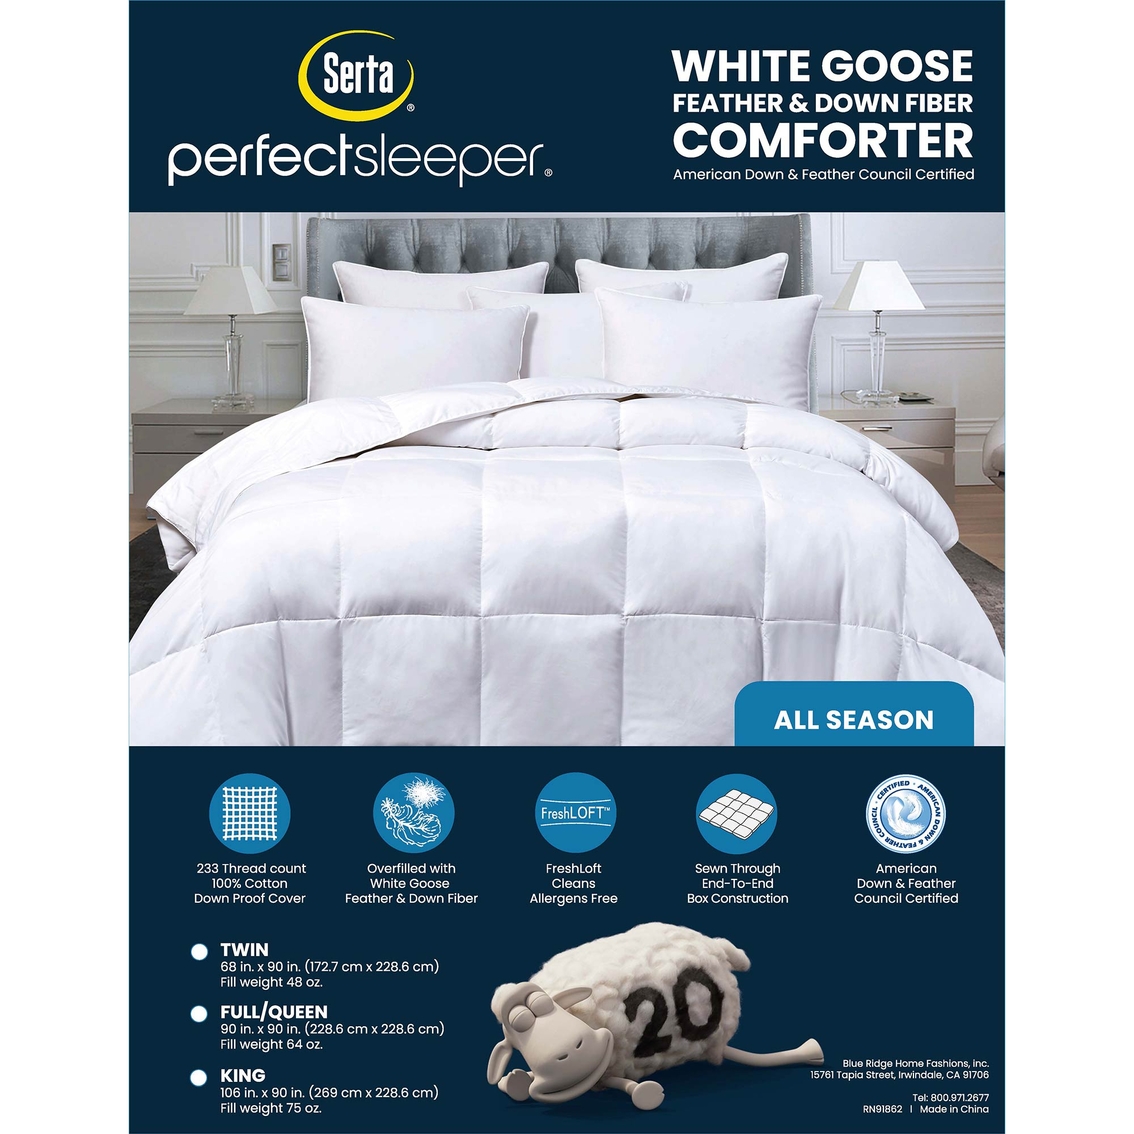 Serta All Season Count Goose Feather and Goose Down Fiber Comforter - Image 7 of 7